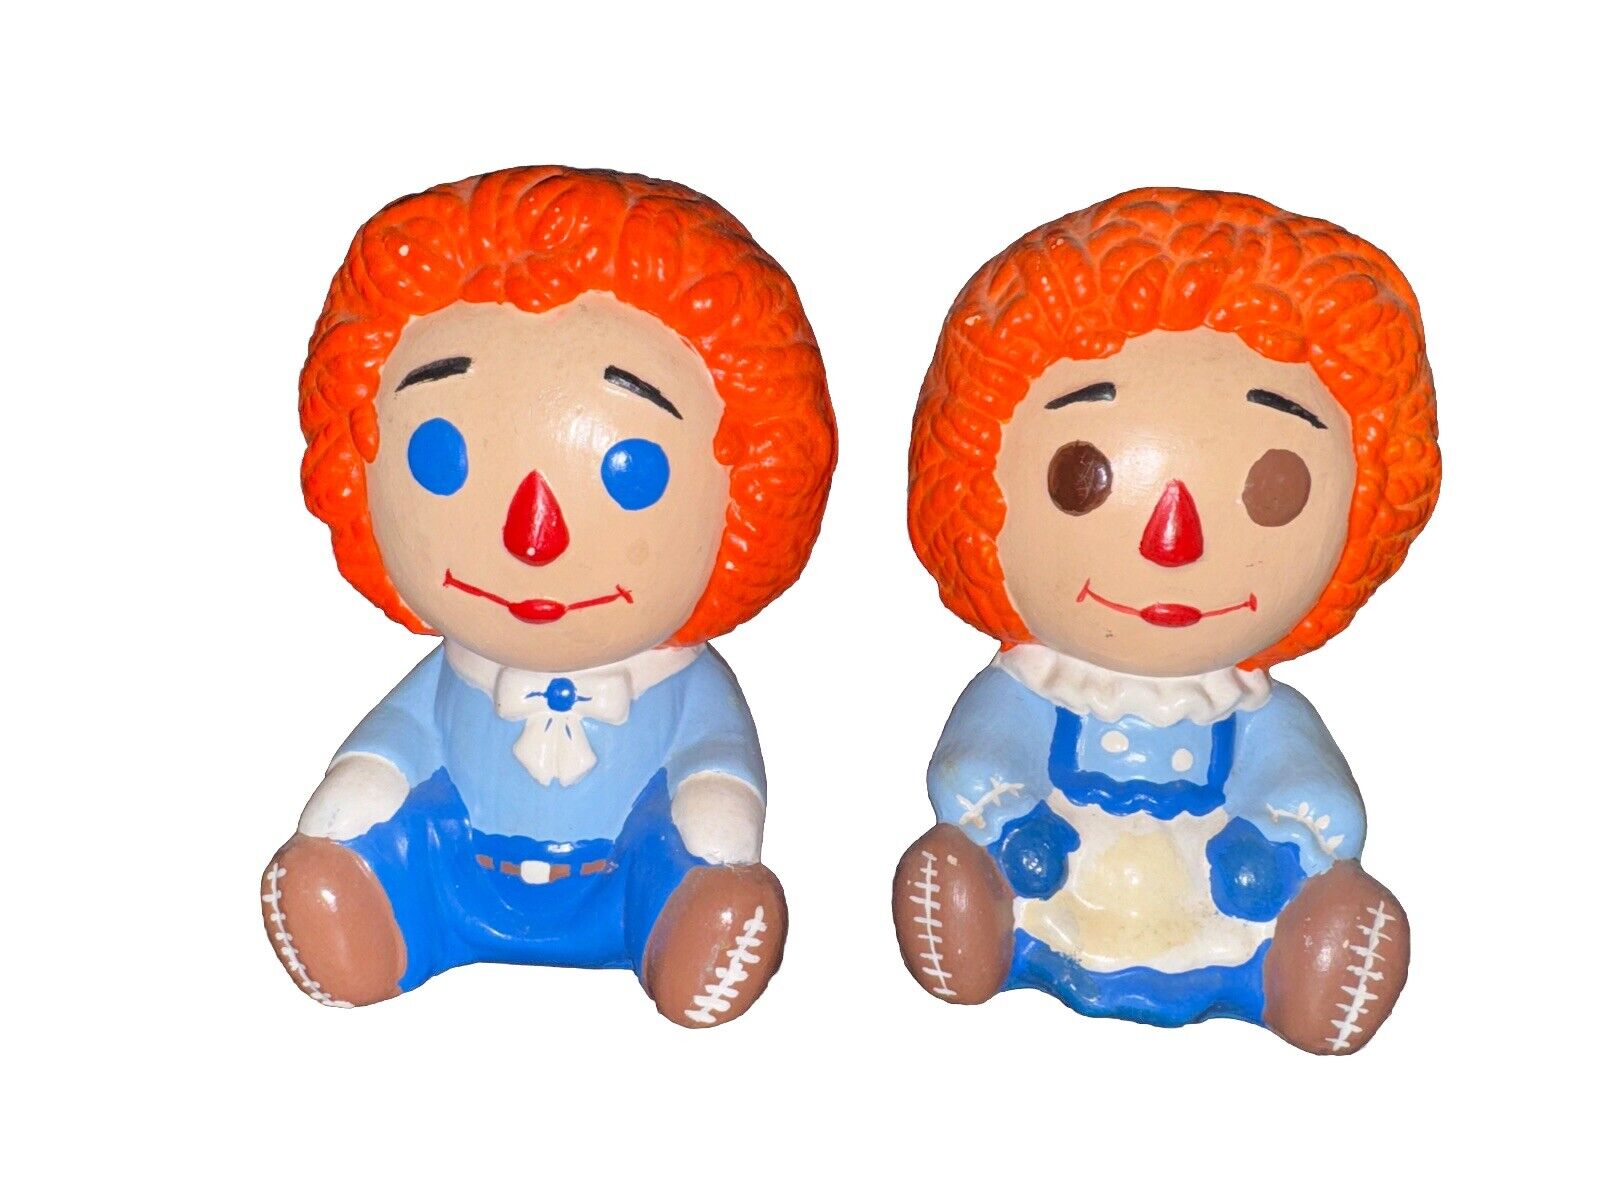 Raggedy Ann and Andy Doll 1970’s Ceramic Mold Hand Painted Classic Collection